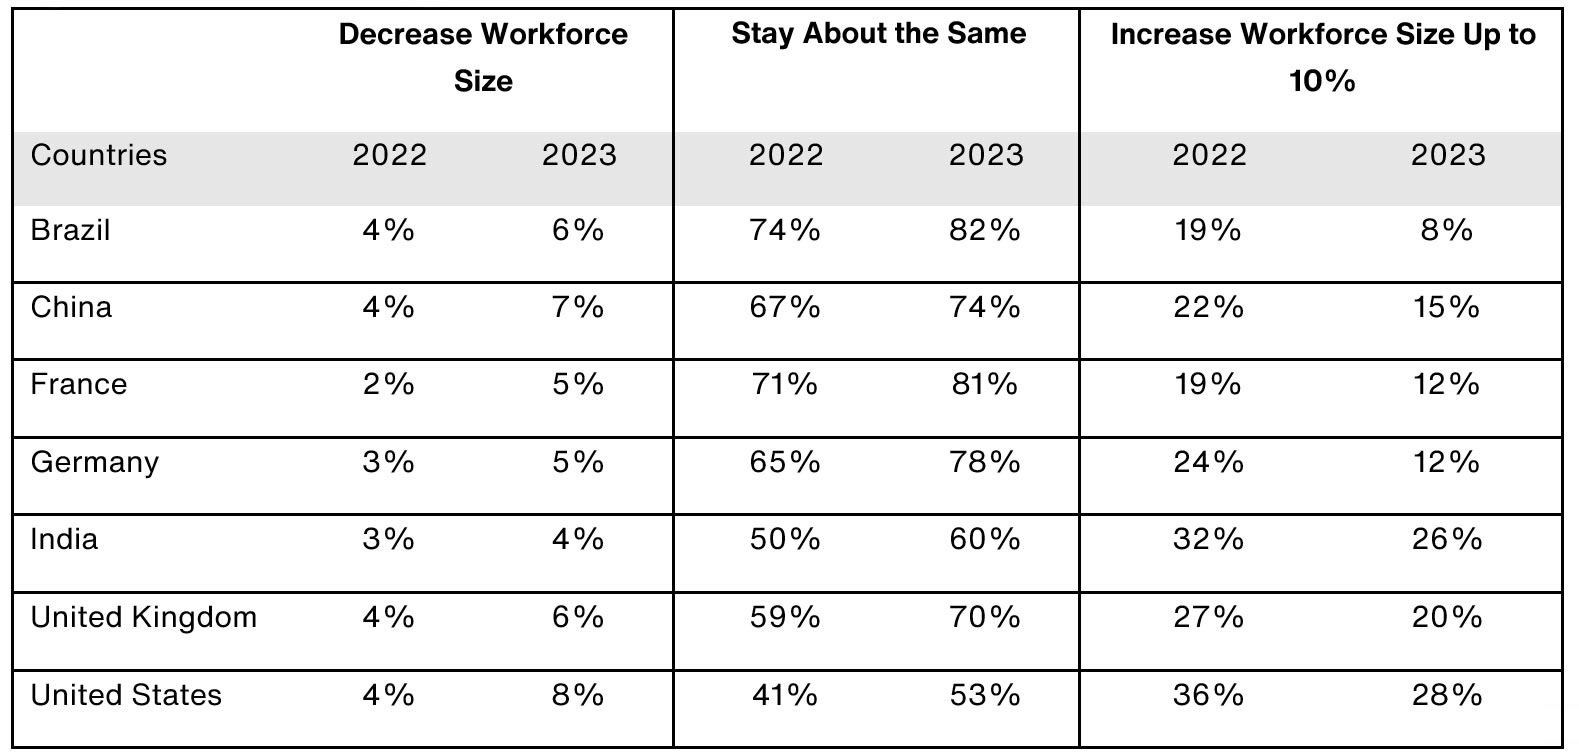 How to Balance Cost with Growth in a Shifting Talent Market - Expected Workforce Changes in 2022 vs 2023